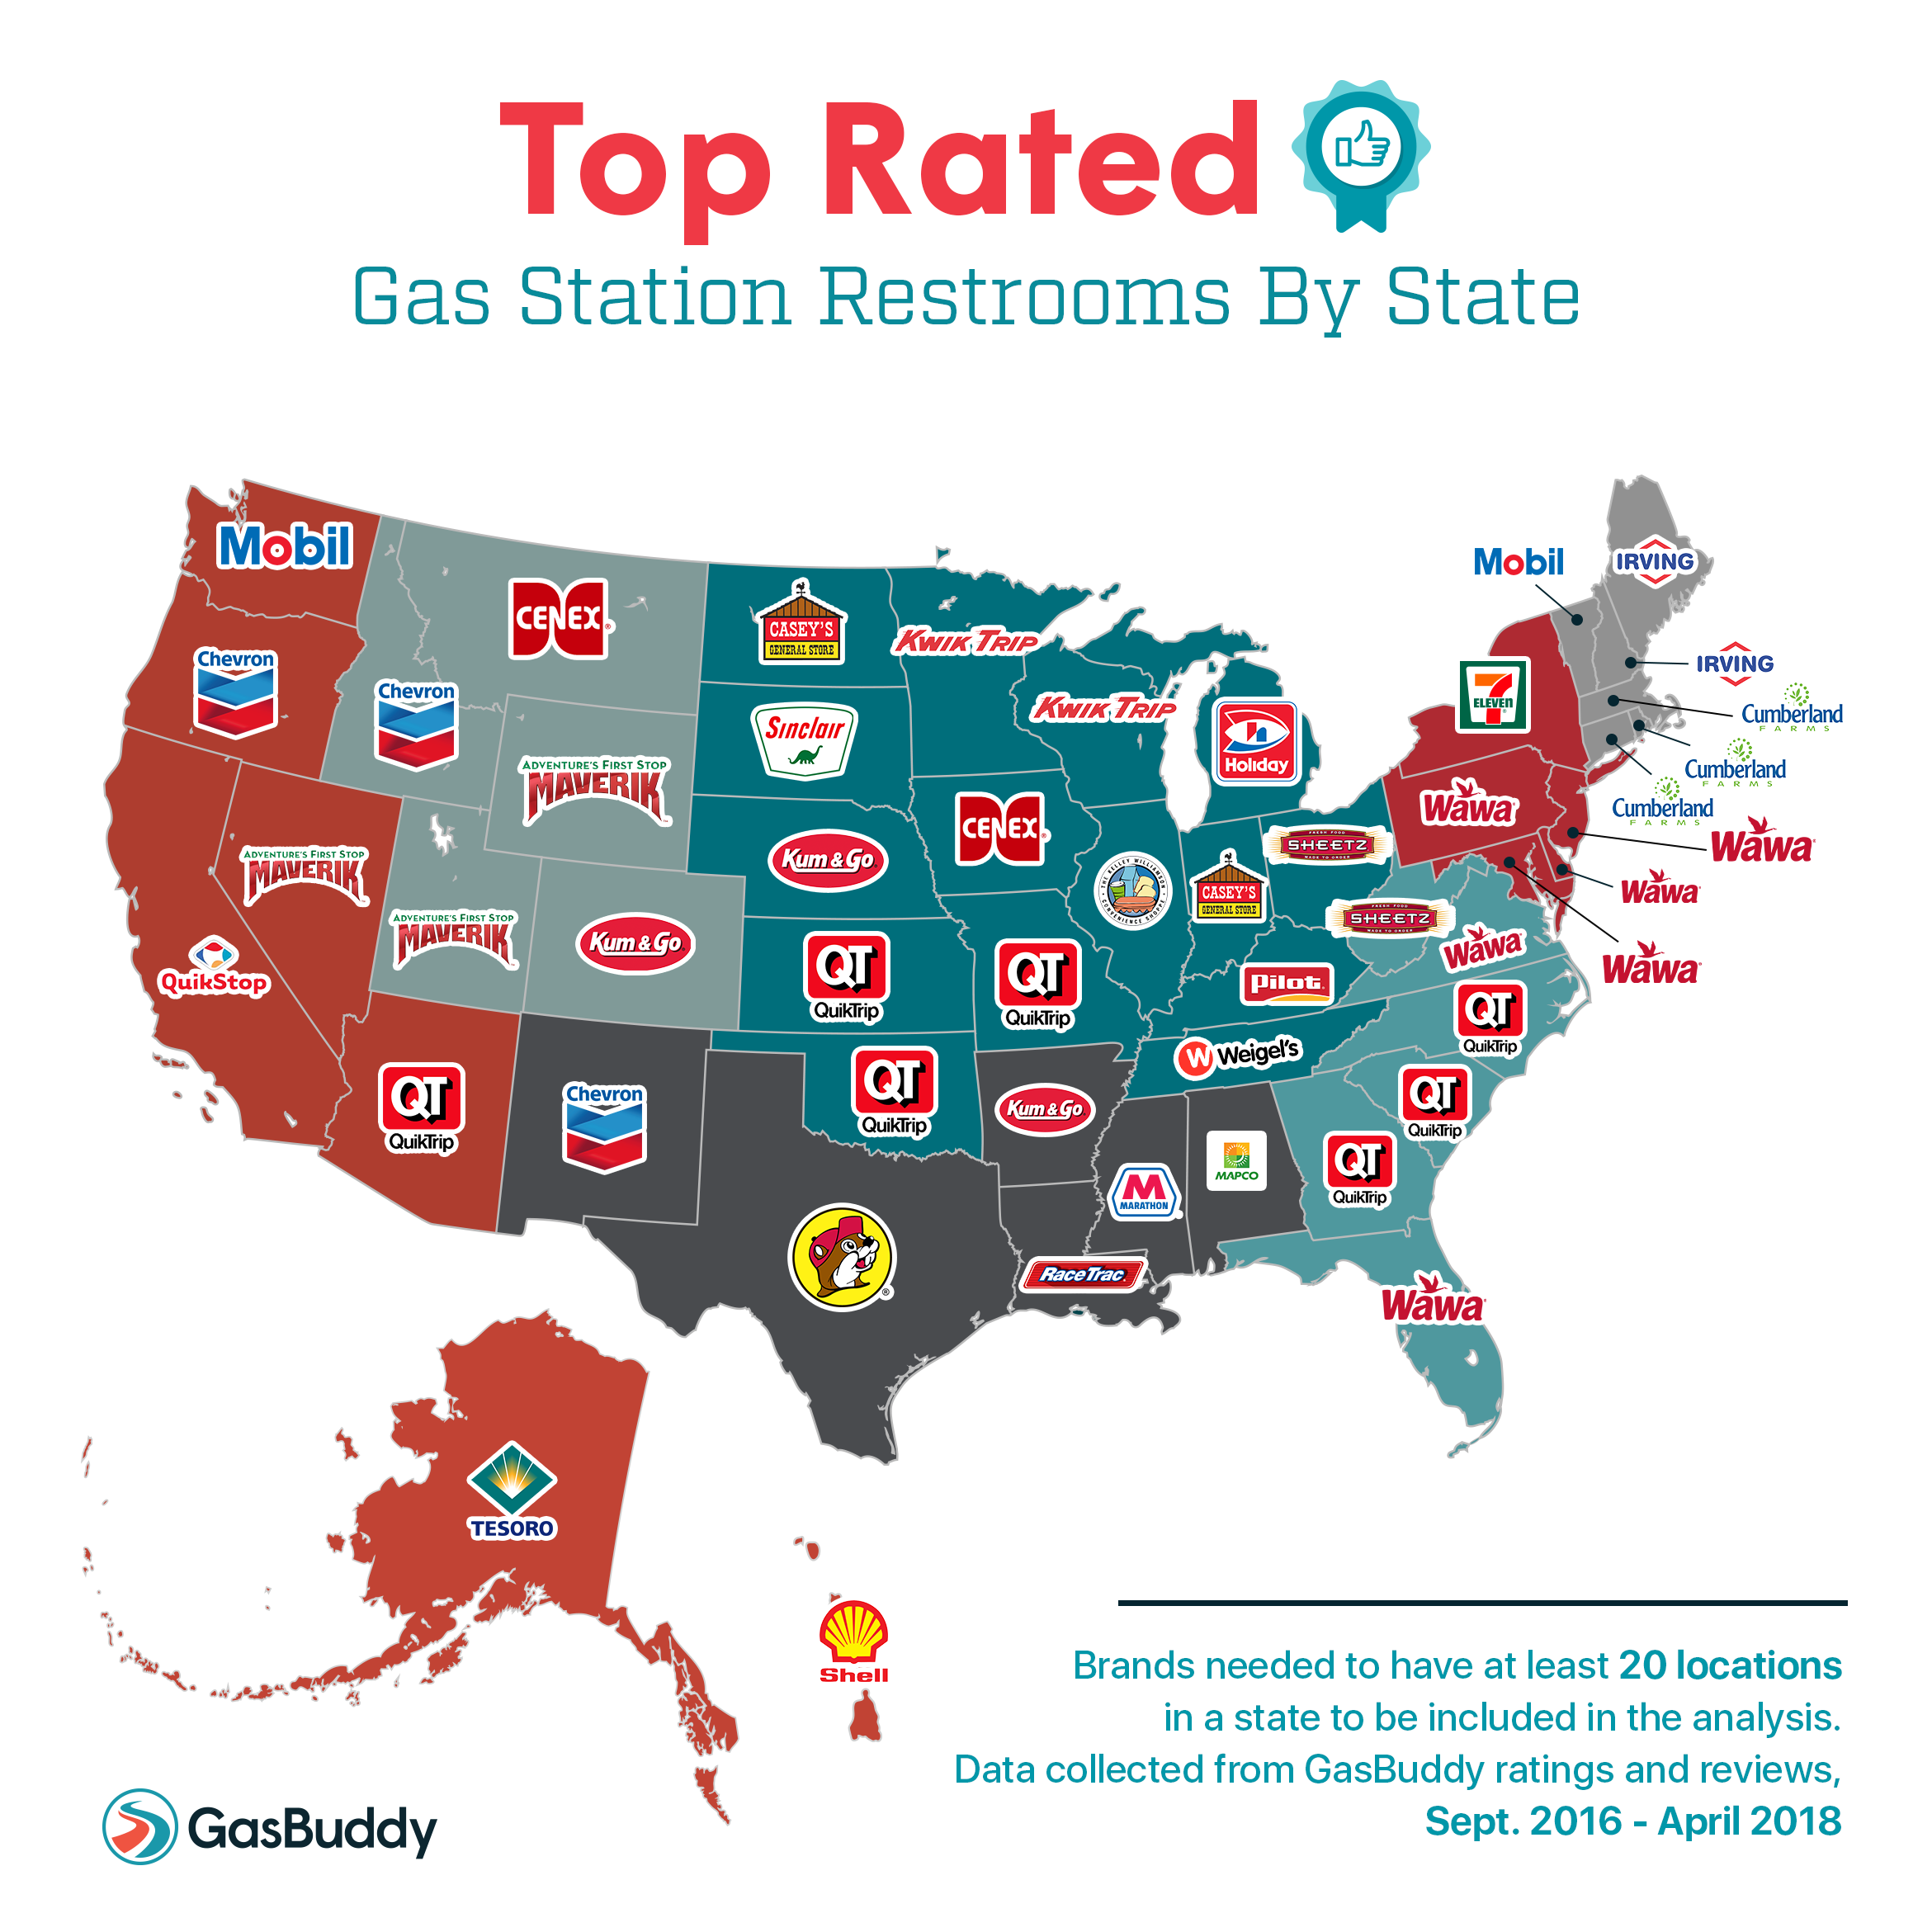 GasBuddy Reveals Top-Rated Gas Station Restrooms